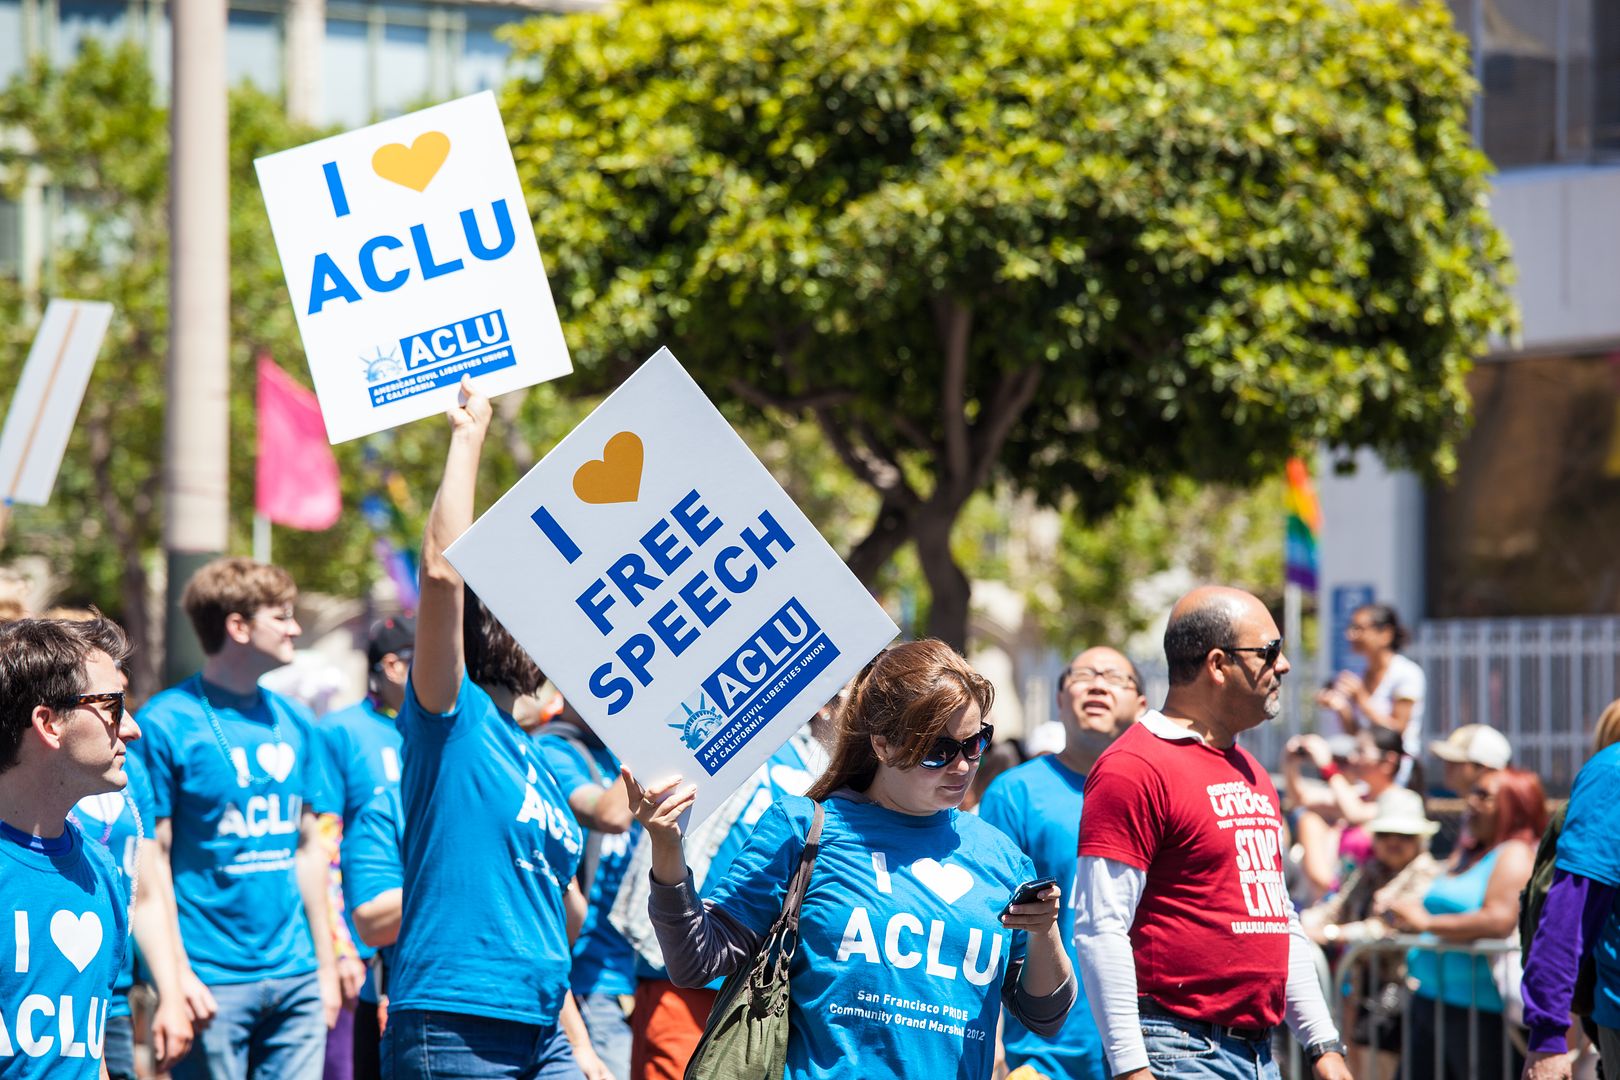 Aclu Leader Prevented From Talking About Free Speech At